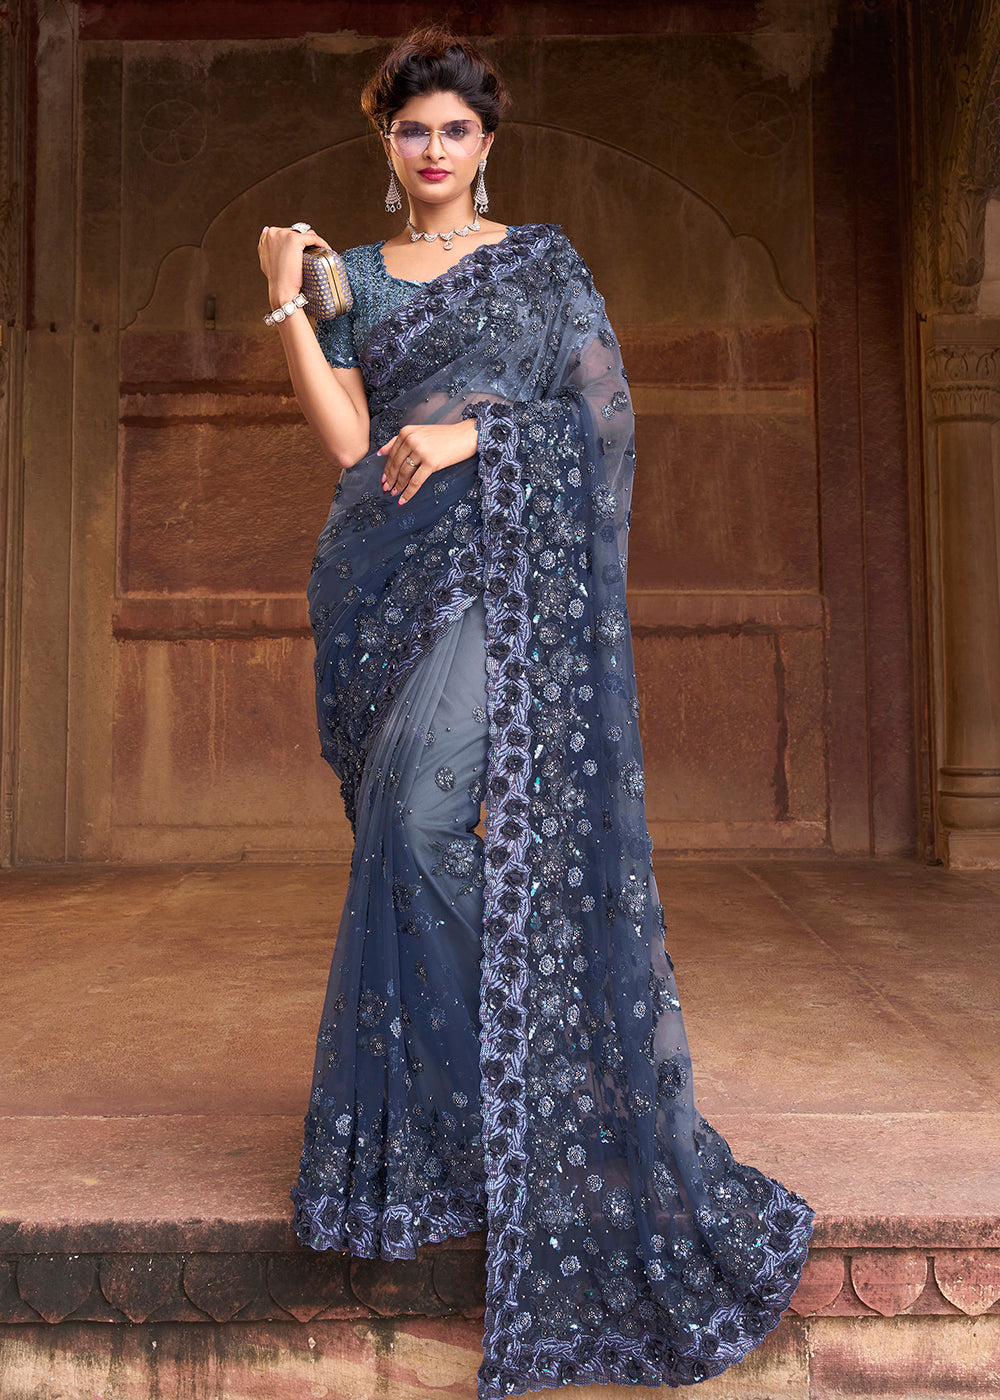 Buy Now Stunning Grey Applique Net Designer Bridal Party Wear Saree Online in USA, UK, Canada & Worldwide at Empress Clothing.